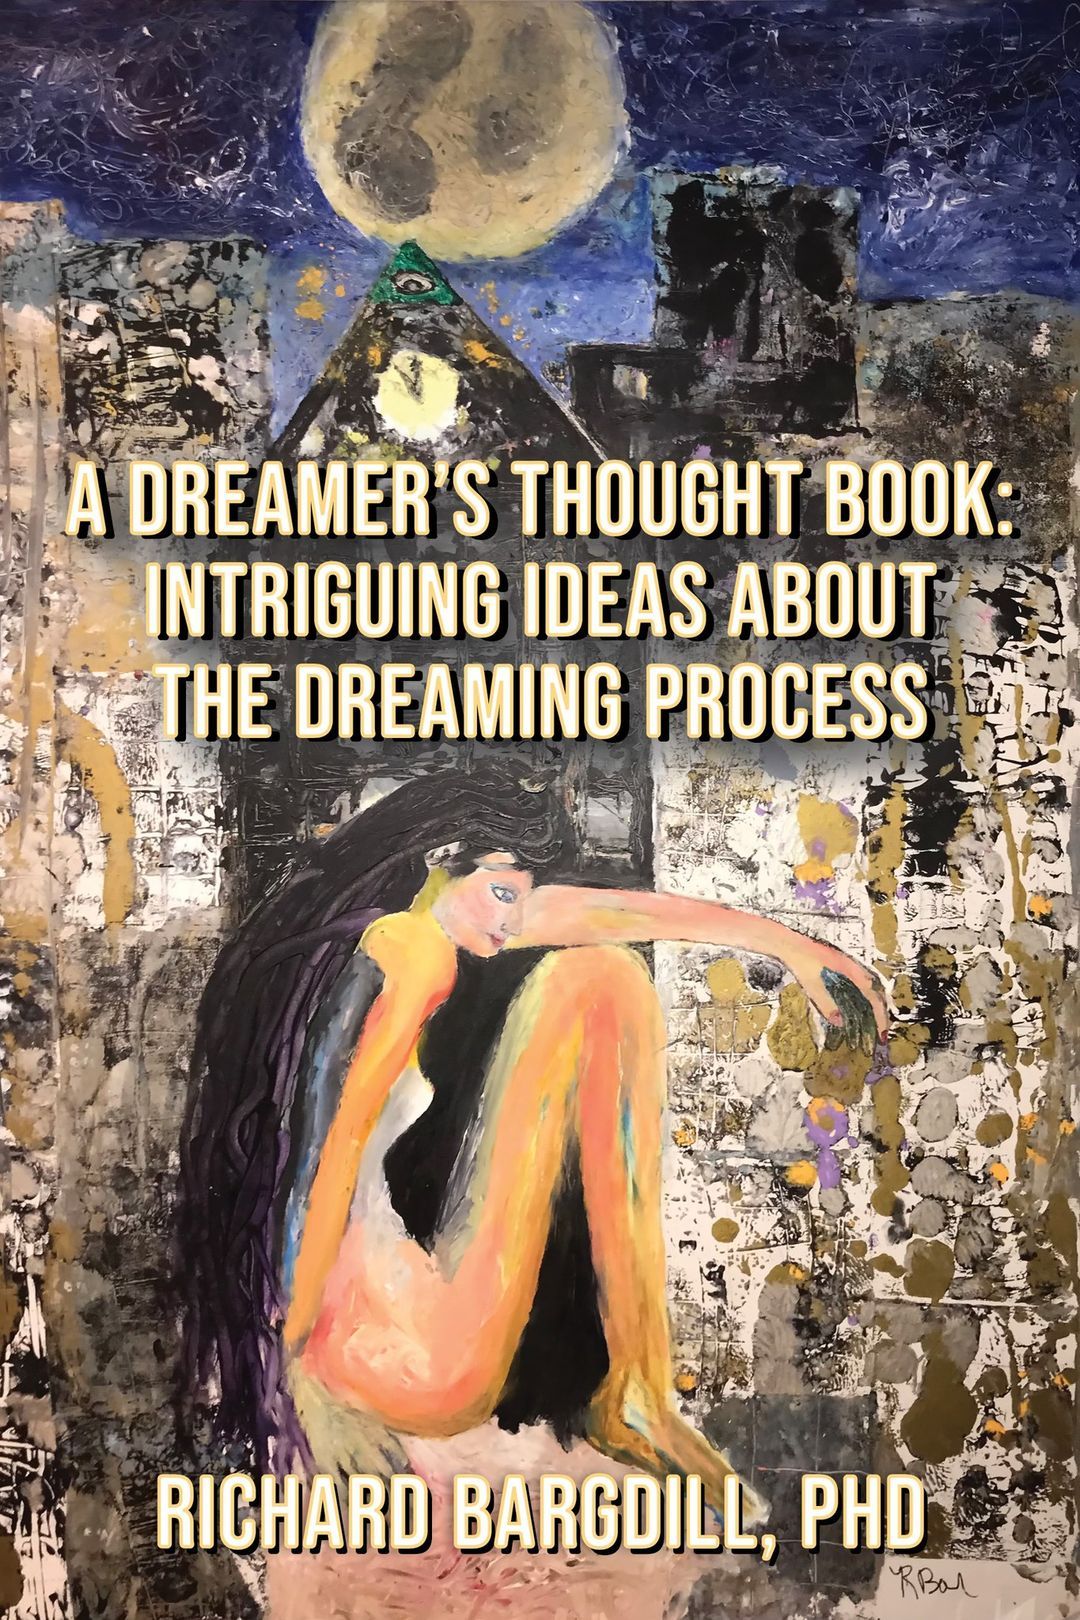 The Dream Journal Podcast with Katherine Bell